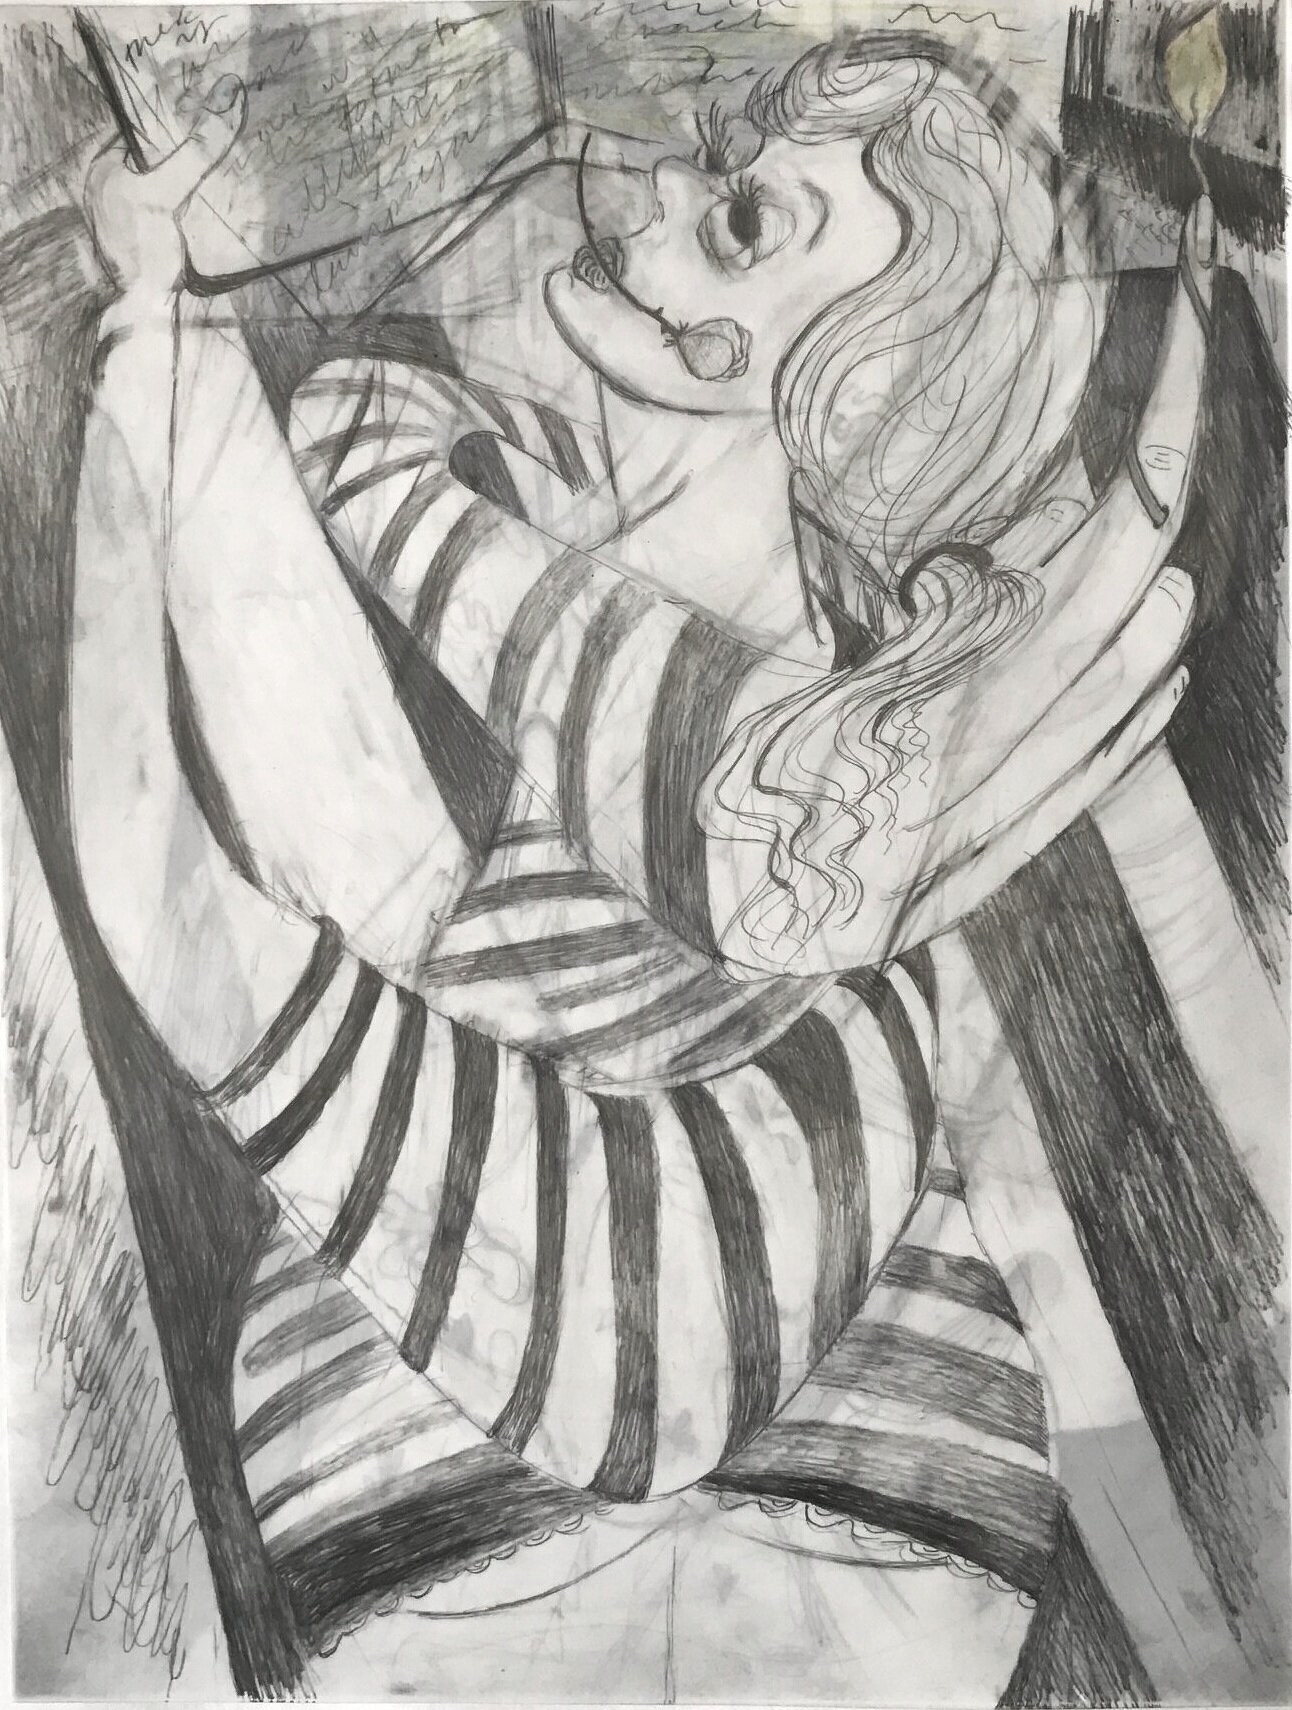   Night Read,  2020, graphite and colored pencil on translucent Yupo paper (one side of front-and-back drawing), 8 x 11 inches 